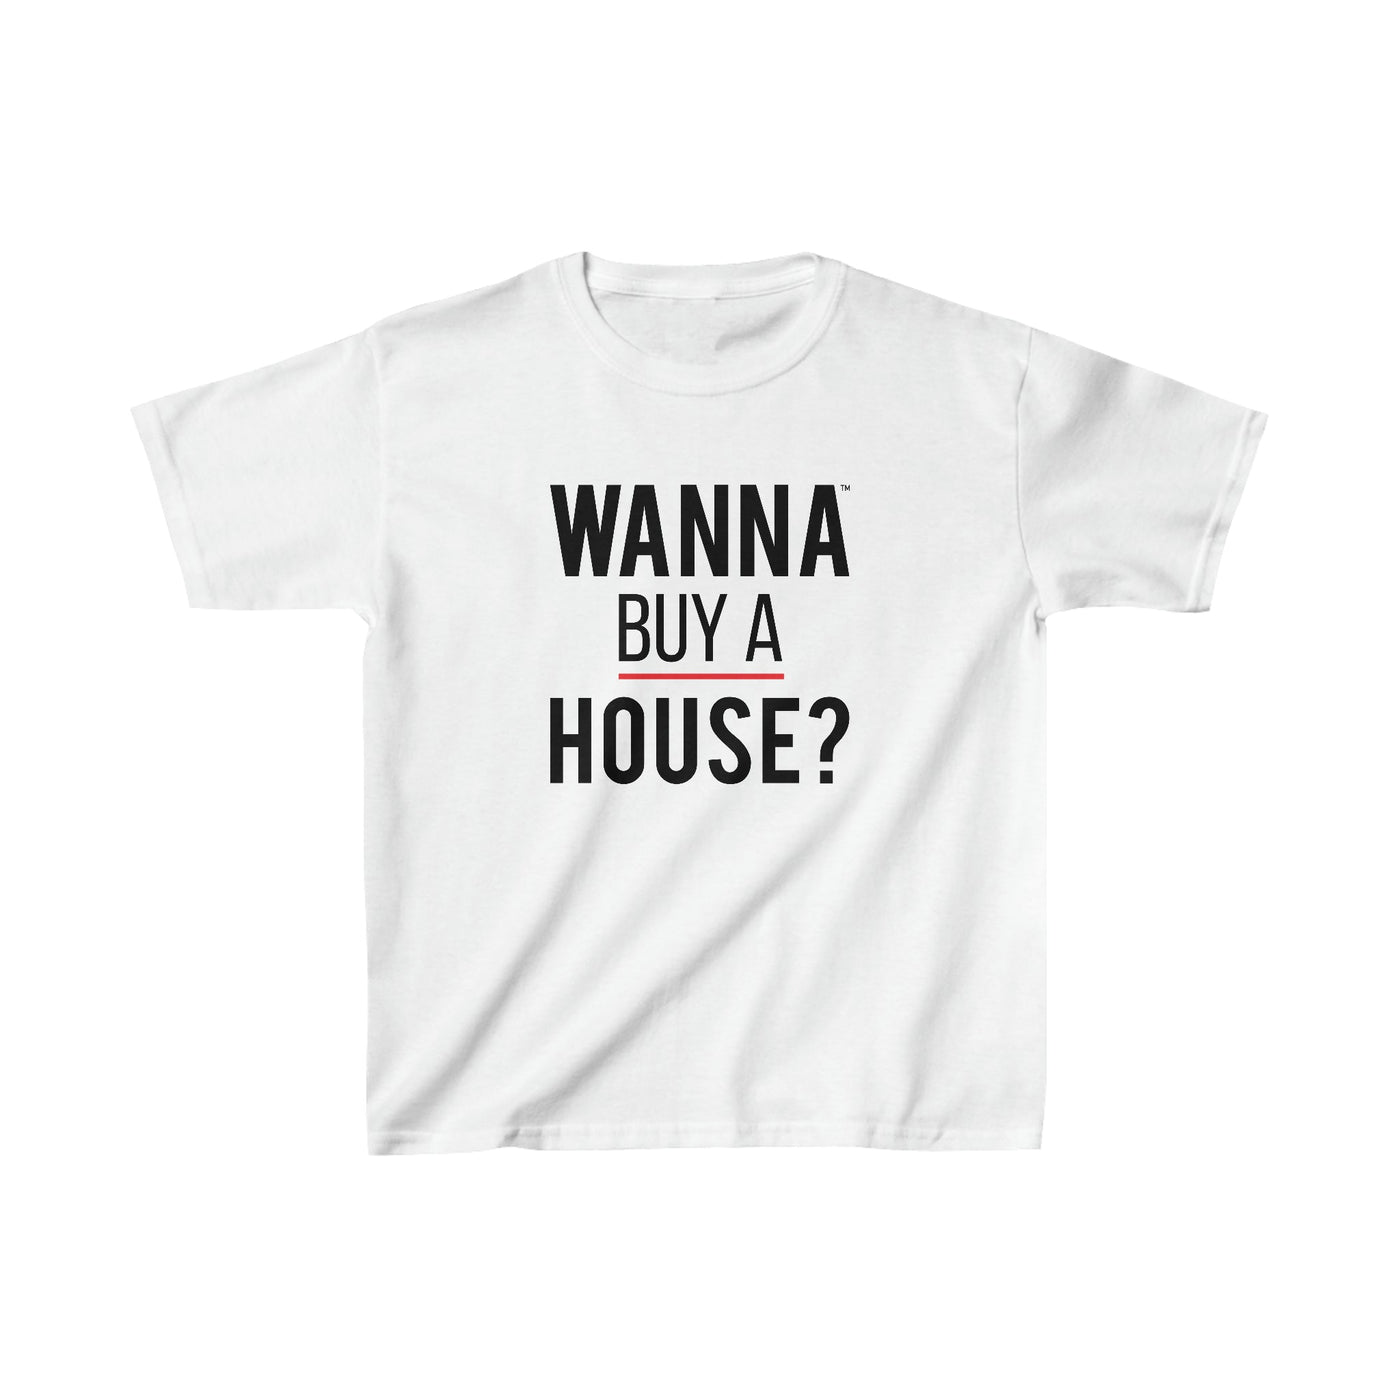 Wanna Buy a House? - Kids Tee - All Things Real Estate